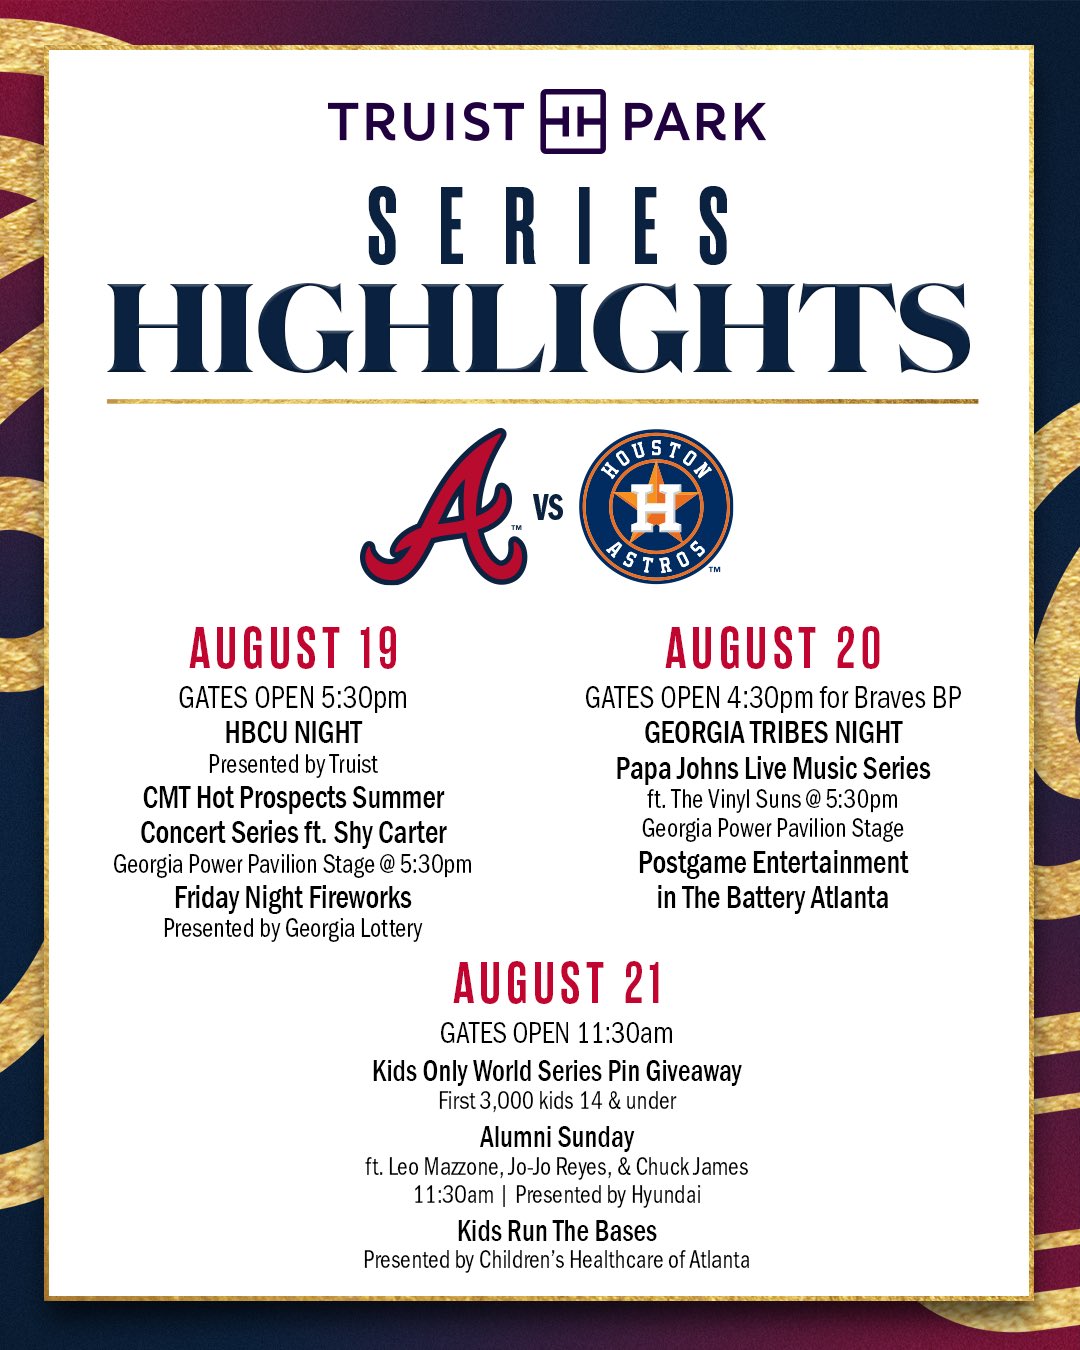 Truist Park on Twitter "This weekend’s braves series highlights for a